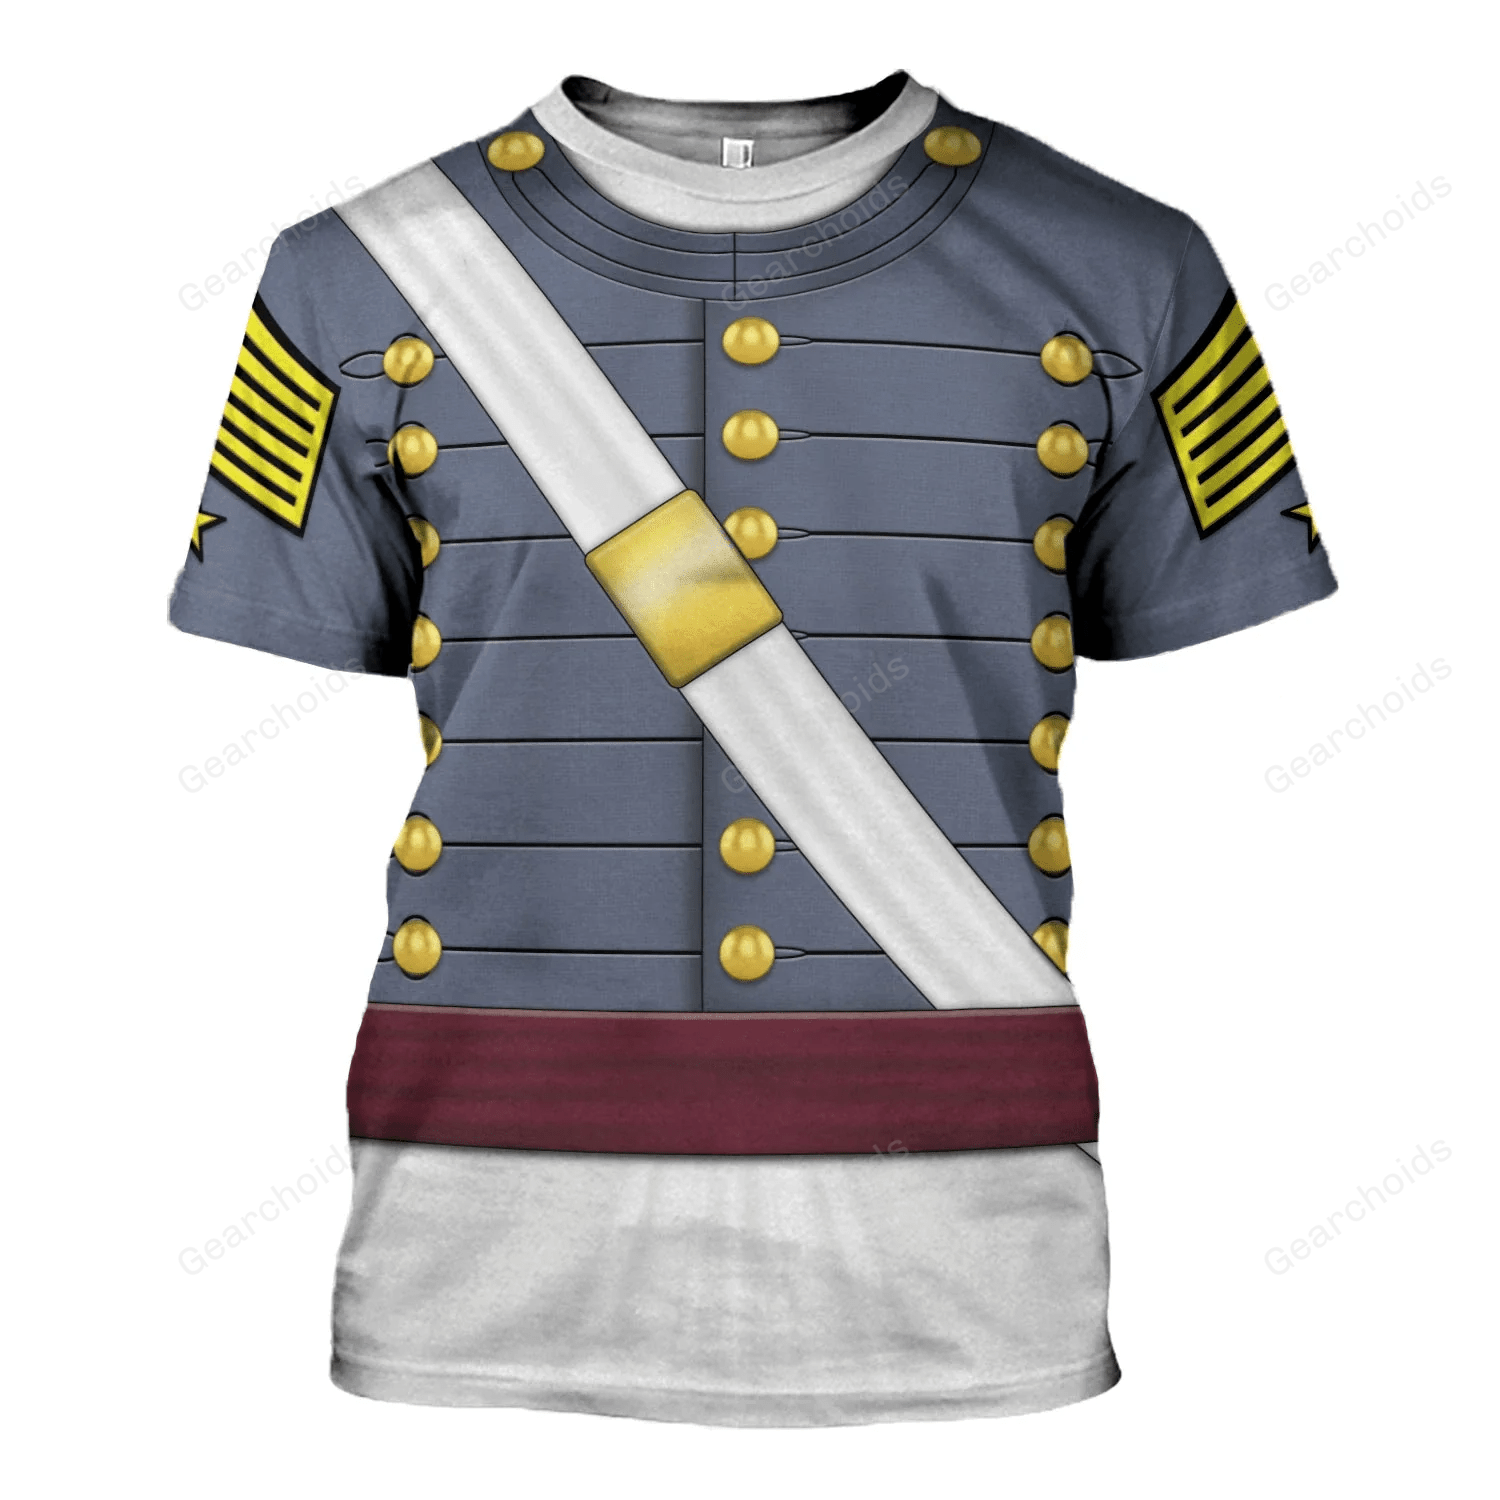 US Army - West Point Cadet (1860s) Costume T-Shirt